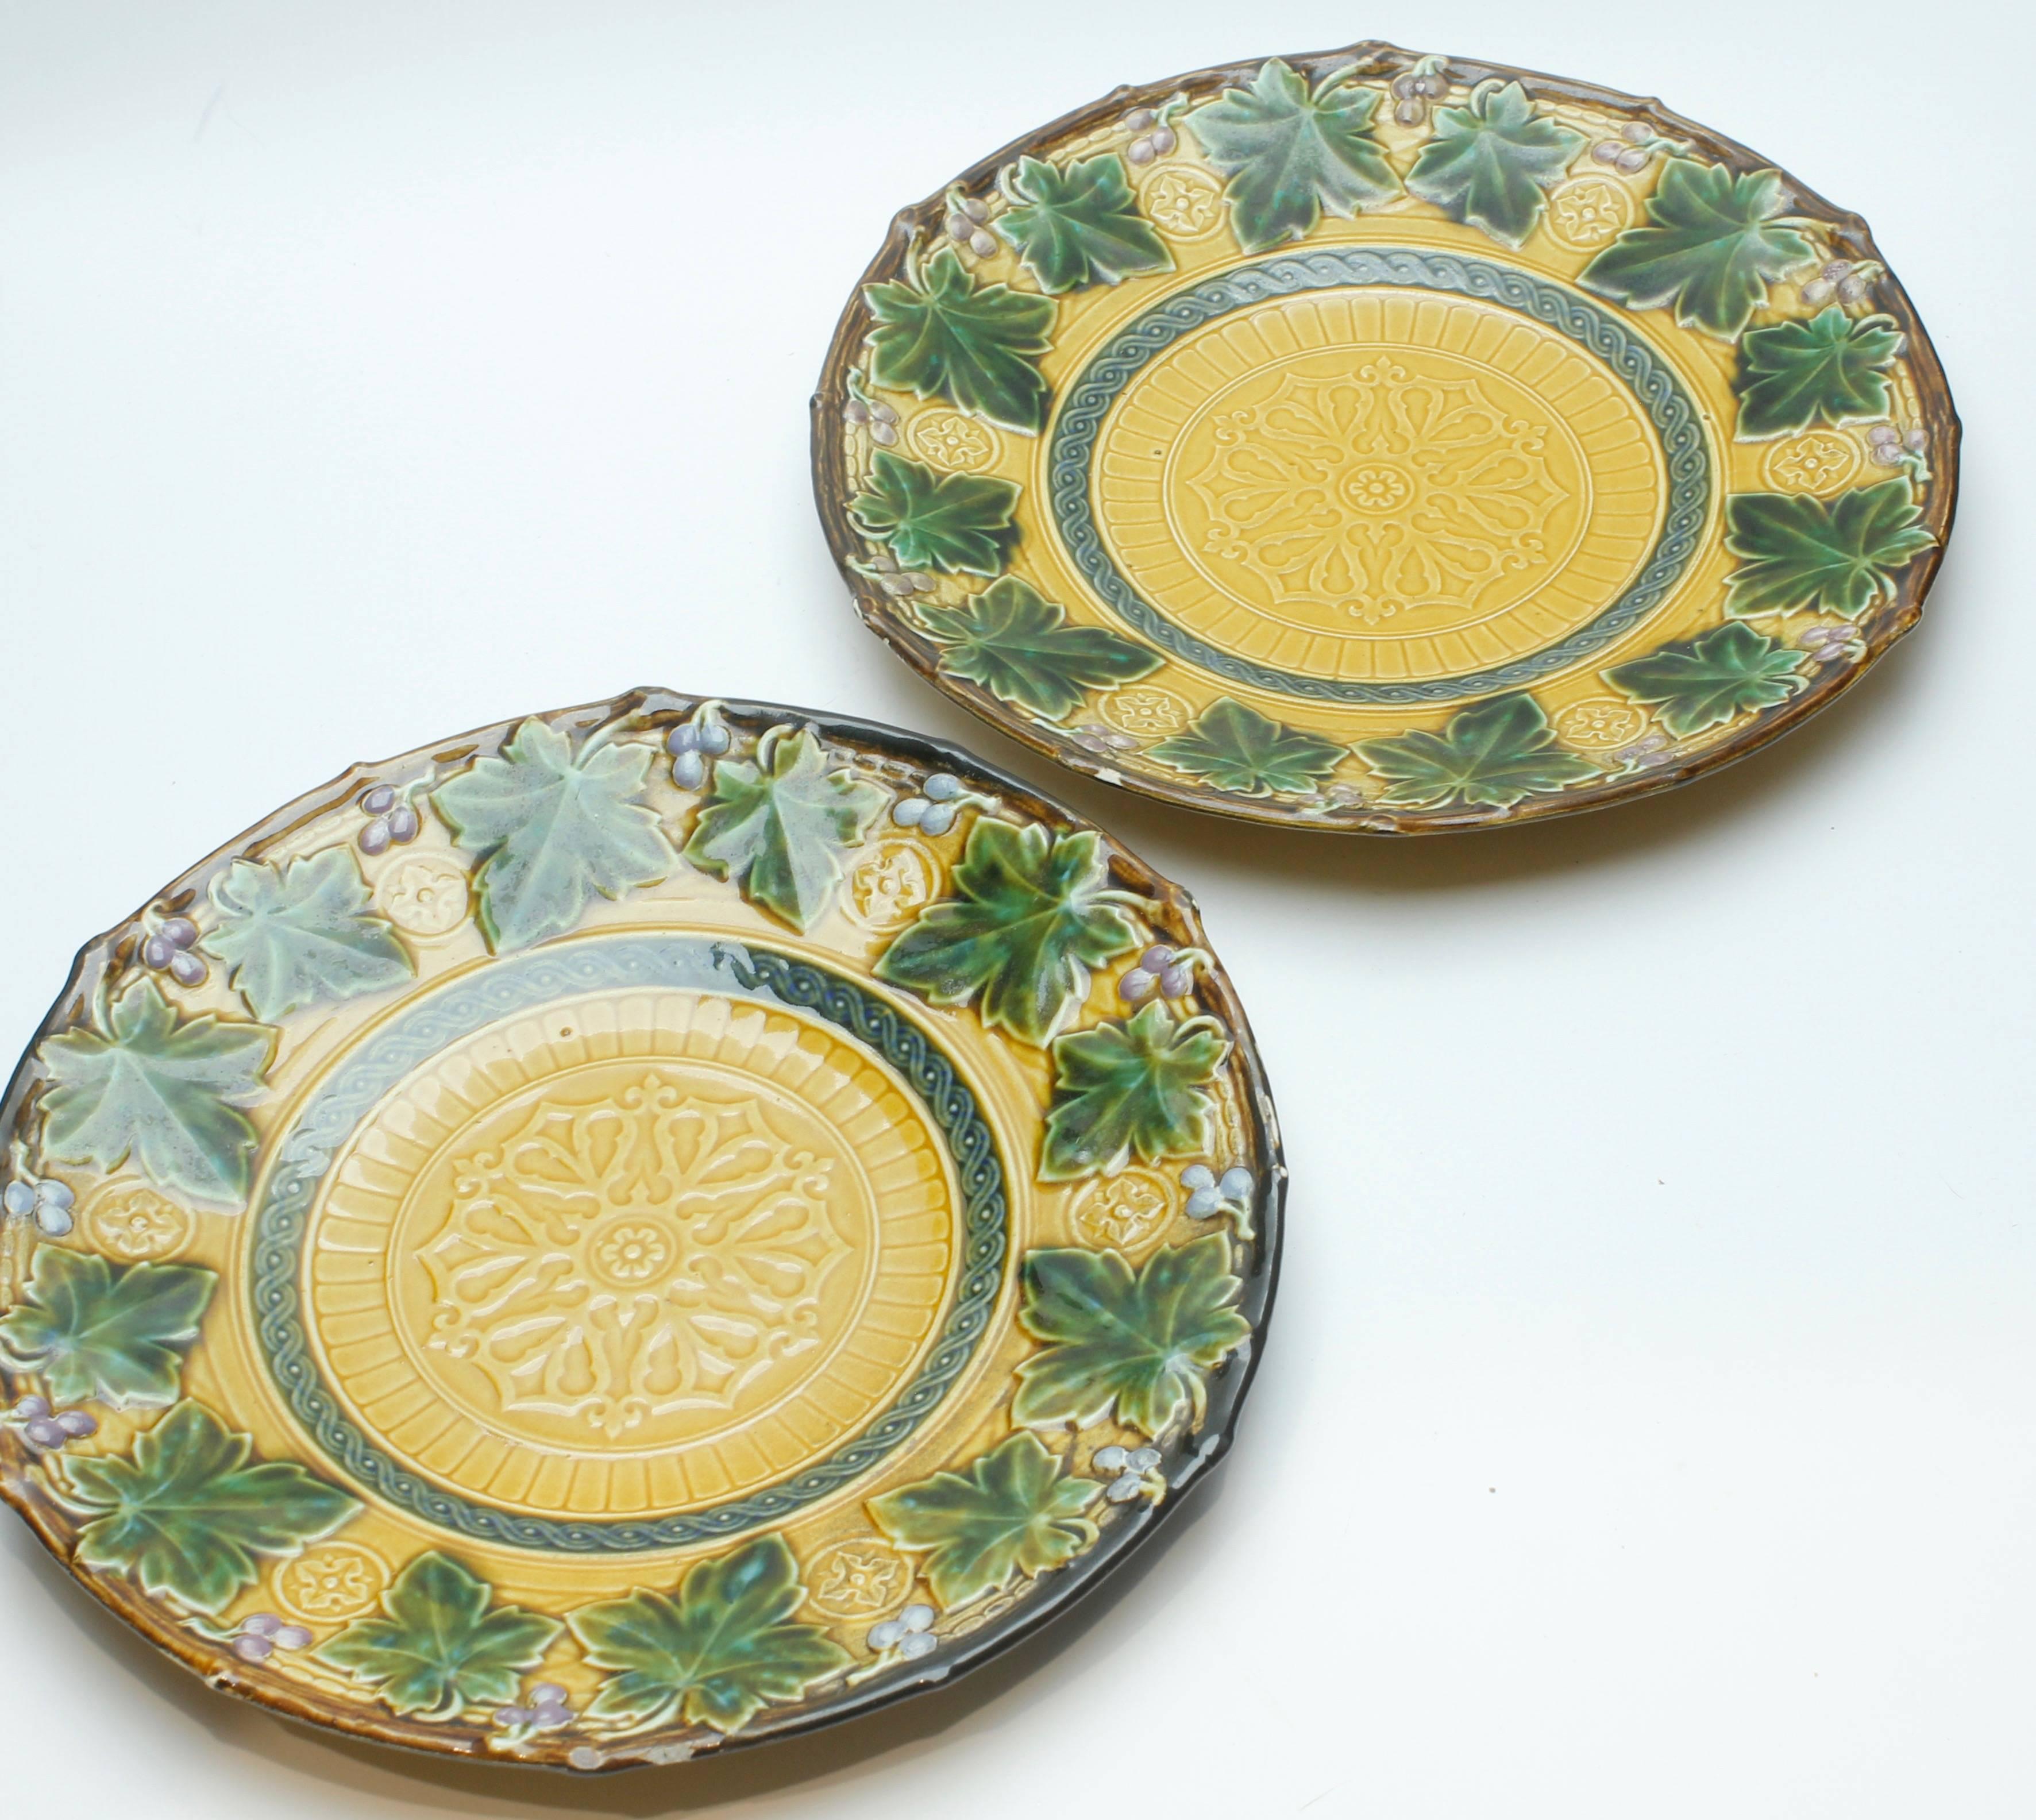 Glazed Art Nouveau Majolica Pattern in Relief Set of 16 Plates Whit Boch Stamp, 1900s